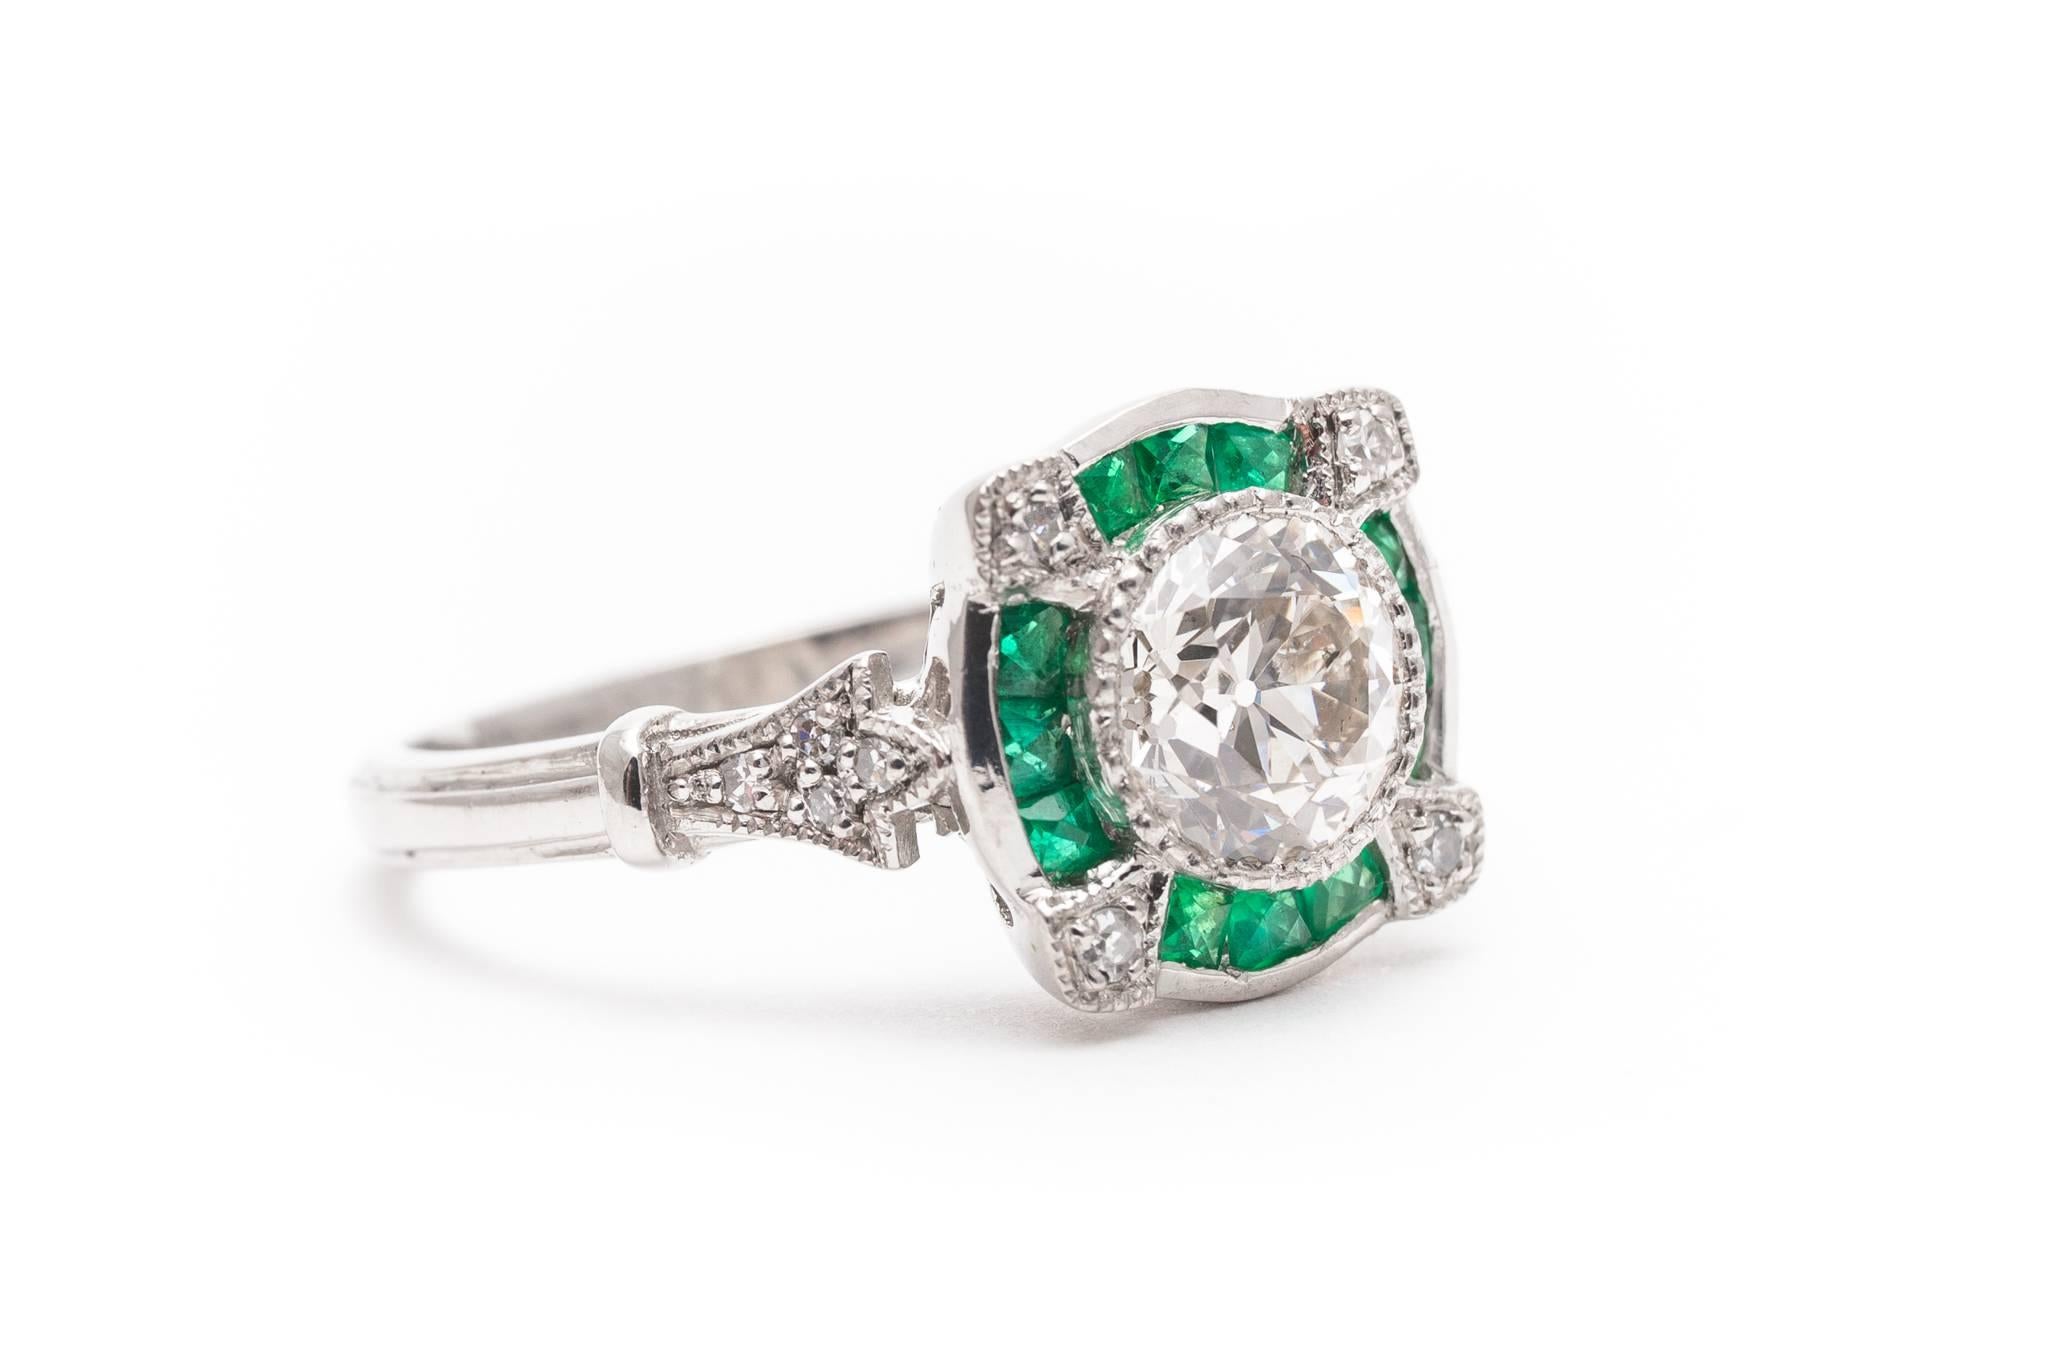 A beautiful diamond and emerald engagement ring in luxurious platinum. Centered by a bezel set antique European cut diamond this ring features surrounding French cut emeralds and accenting diamonds in a handmade platinum mounting.

Of beautiful VS2